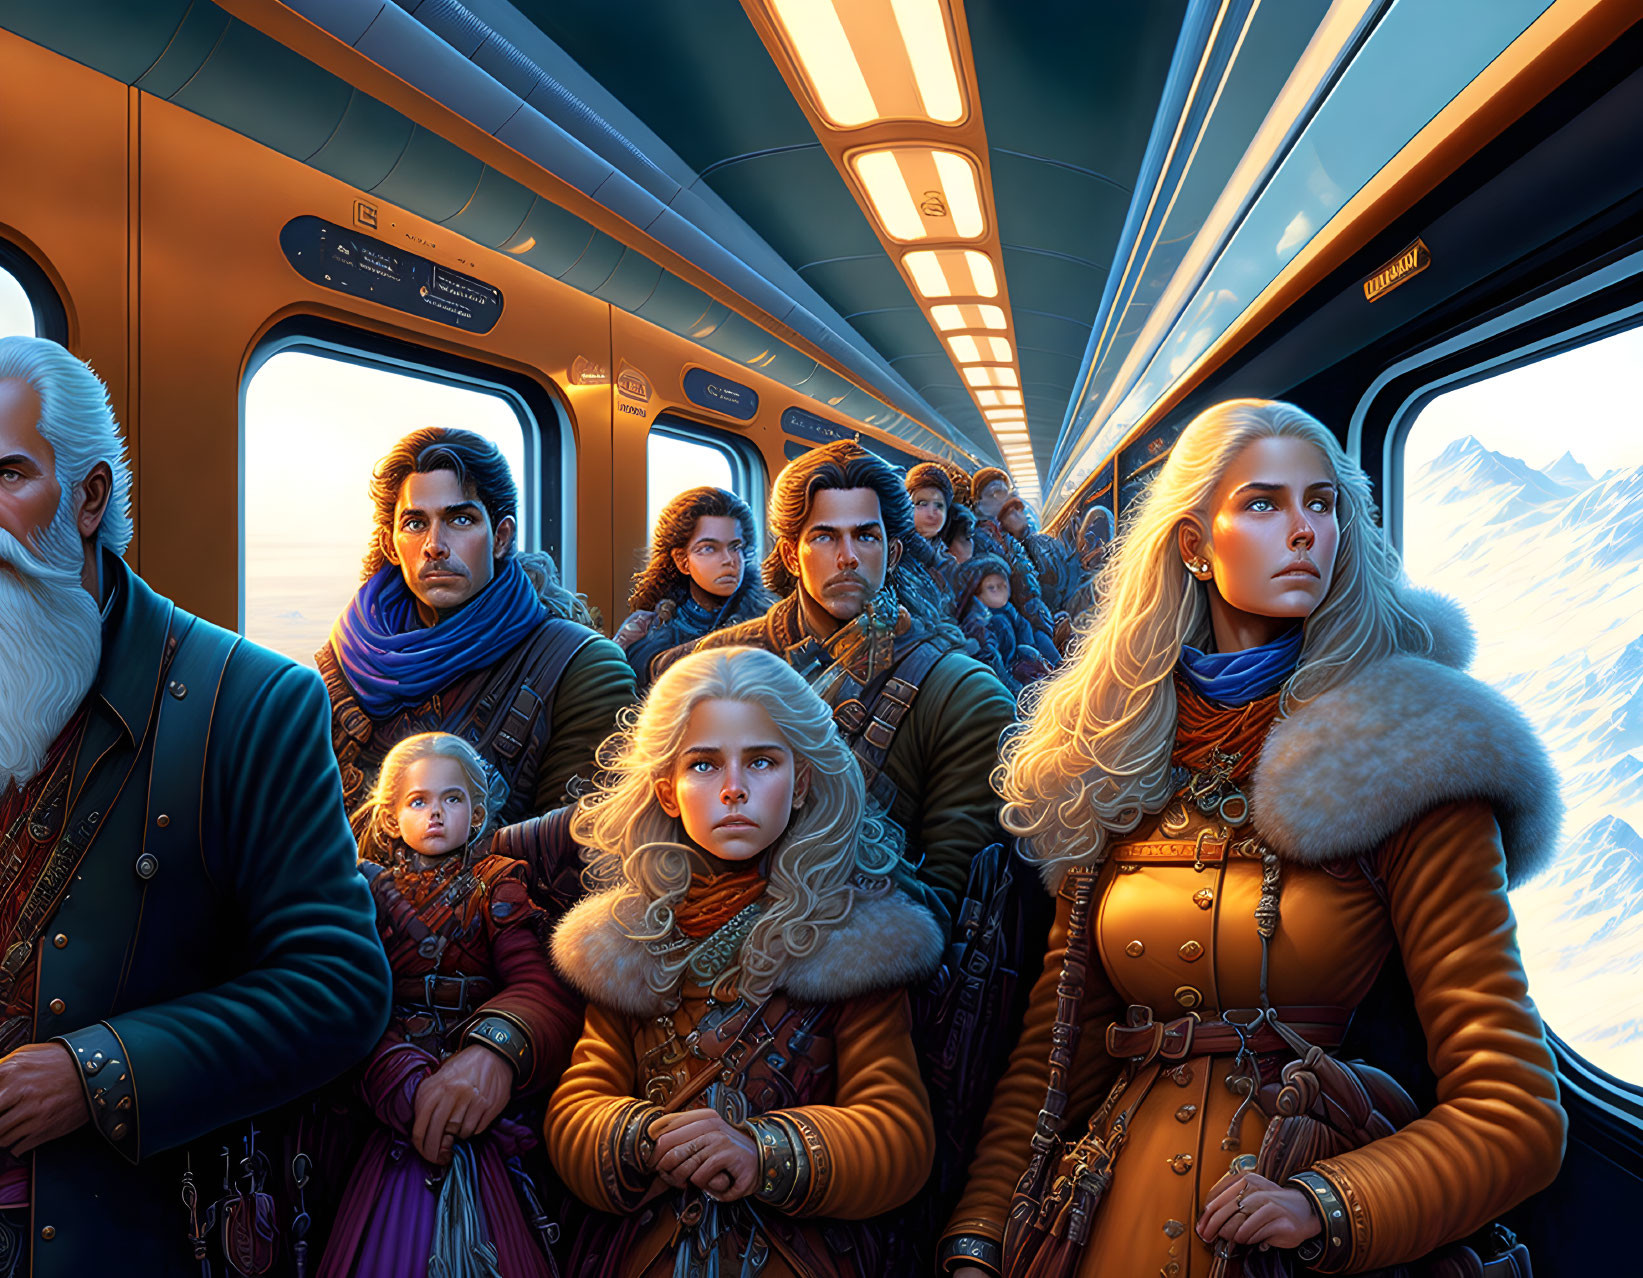 Animated Characters in Medieval Winter Outfits on Train in Snowy Landscape